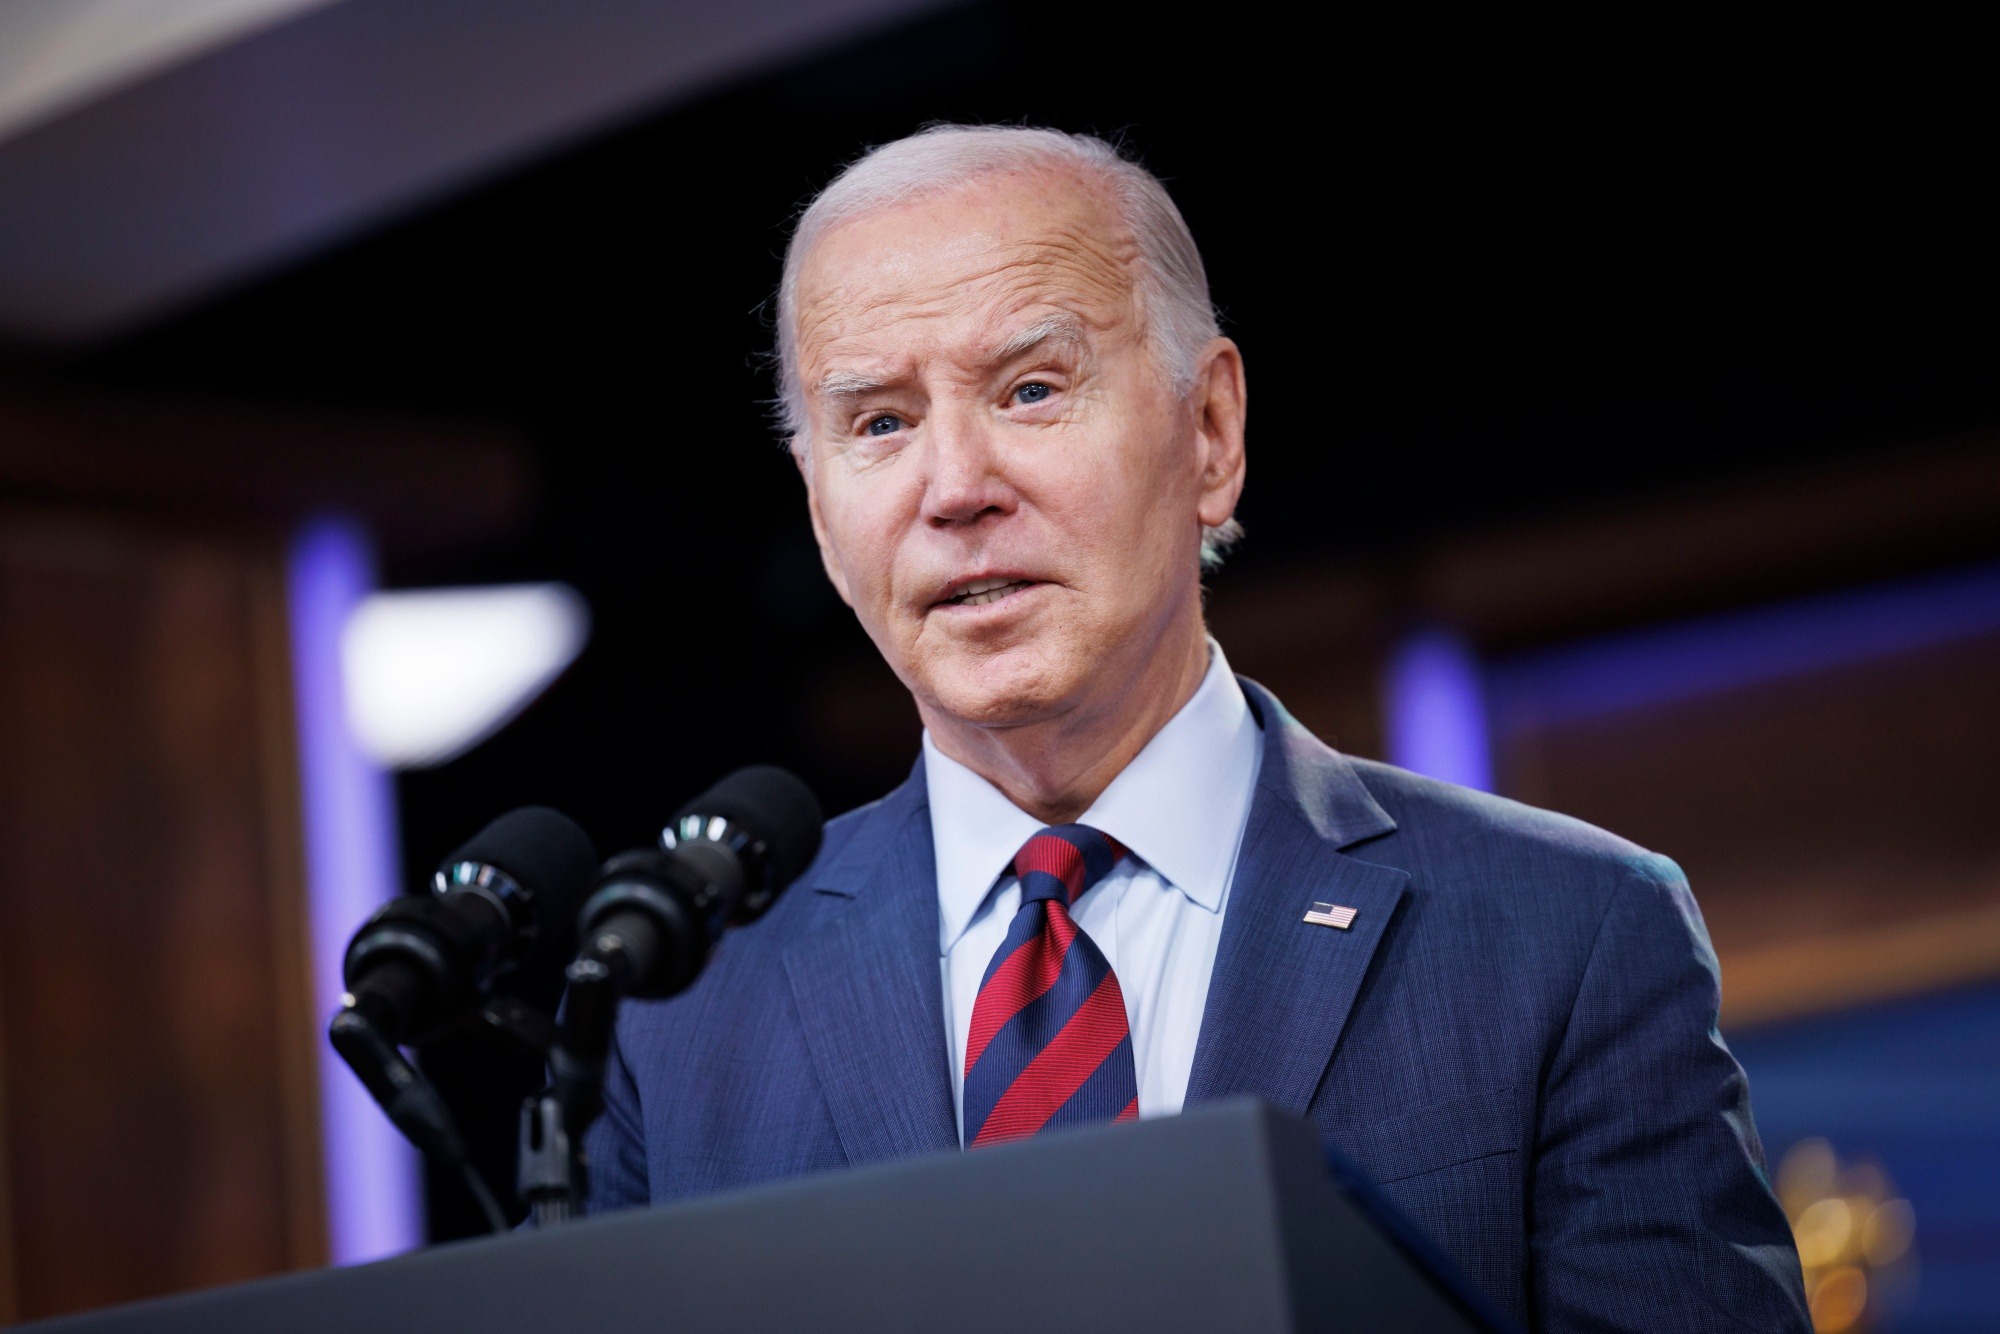 Biden Asserts Readiness to Close the Border if an Agreement Grants Him the Authority